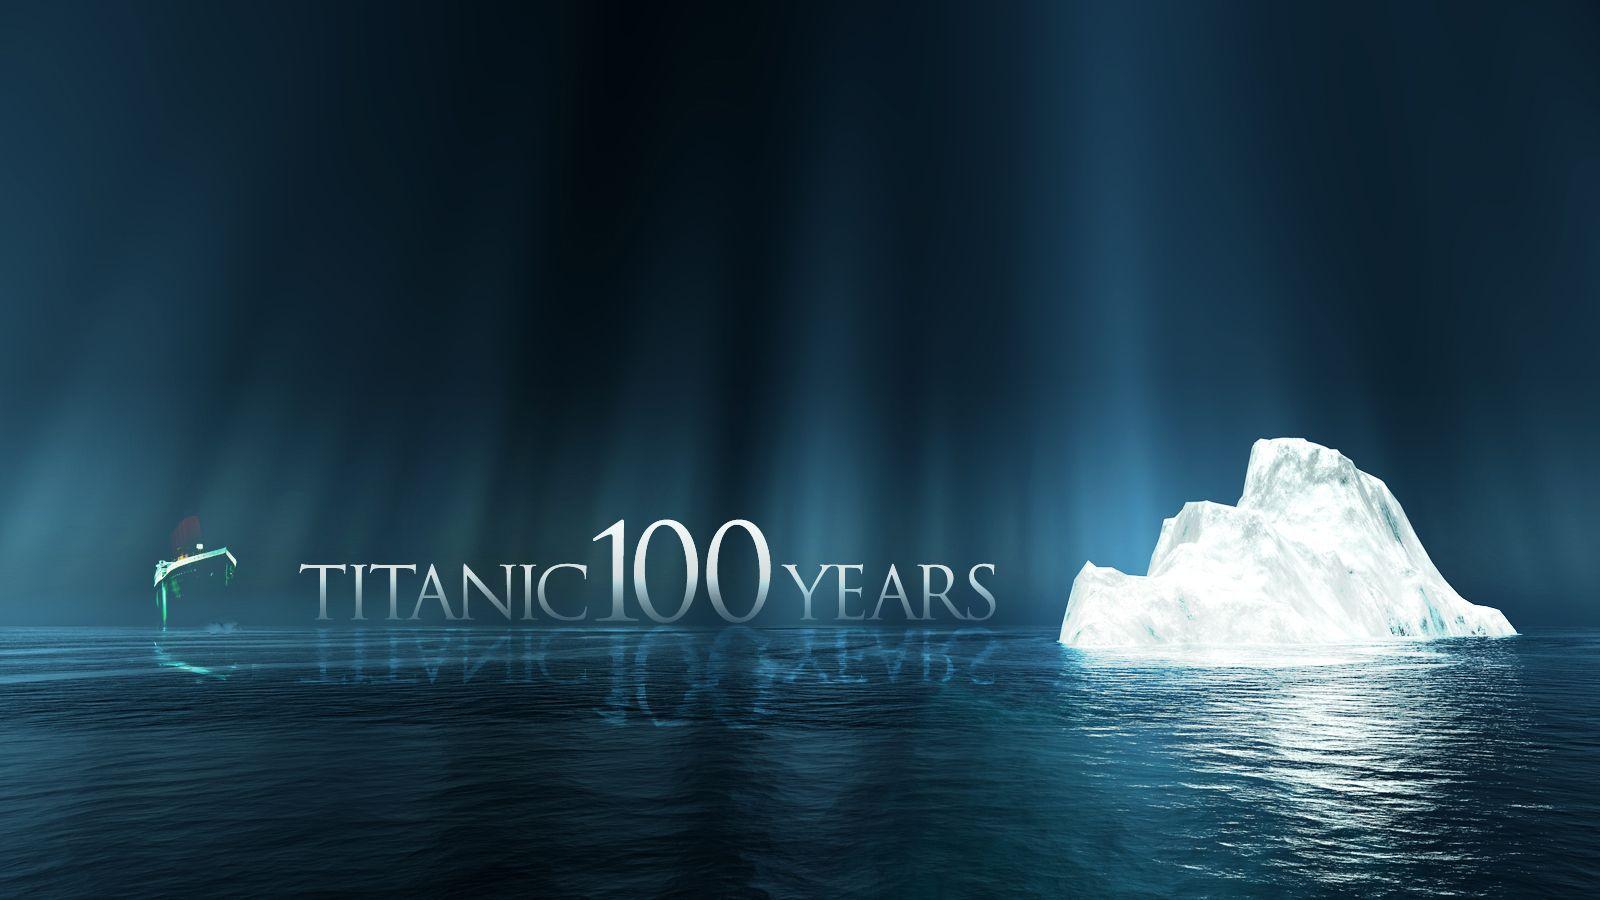 The Titanic practically unsinkable